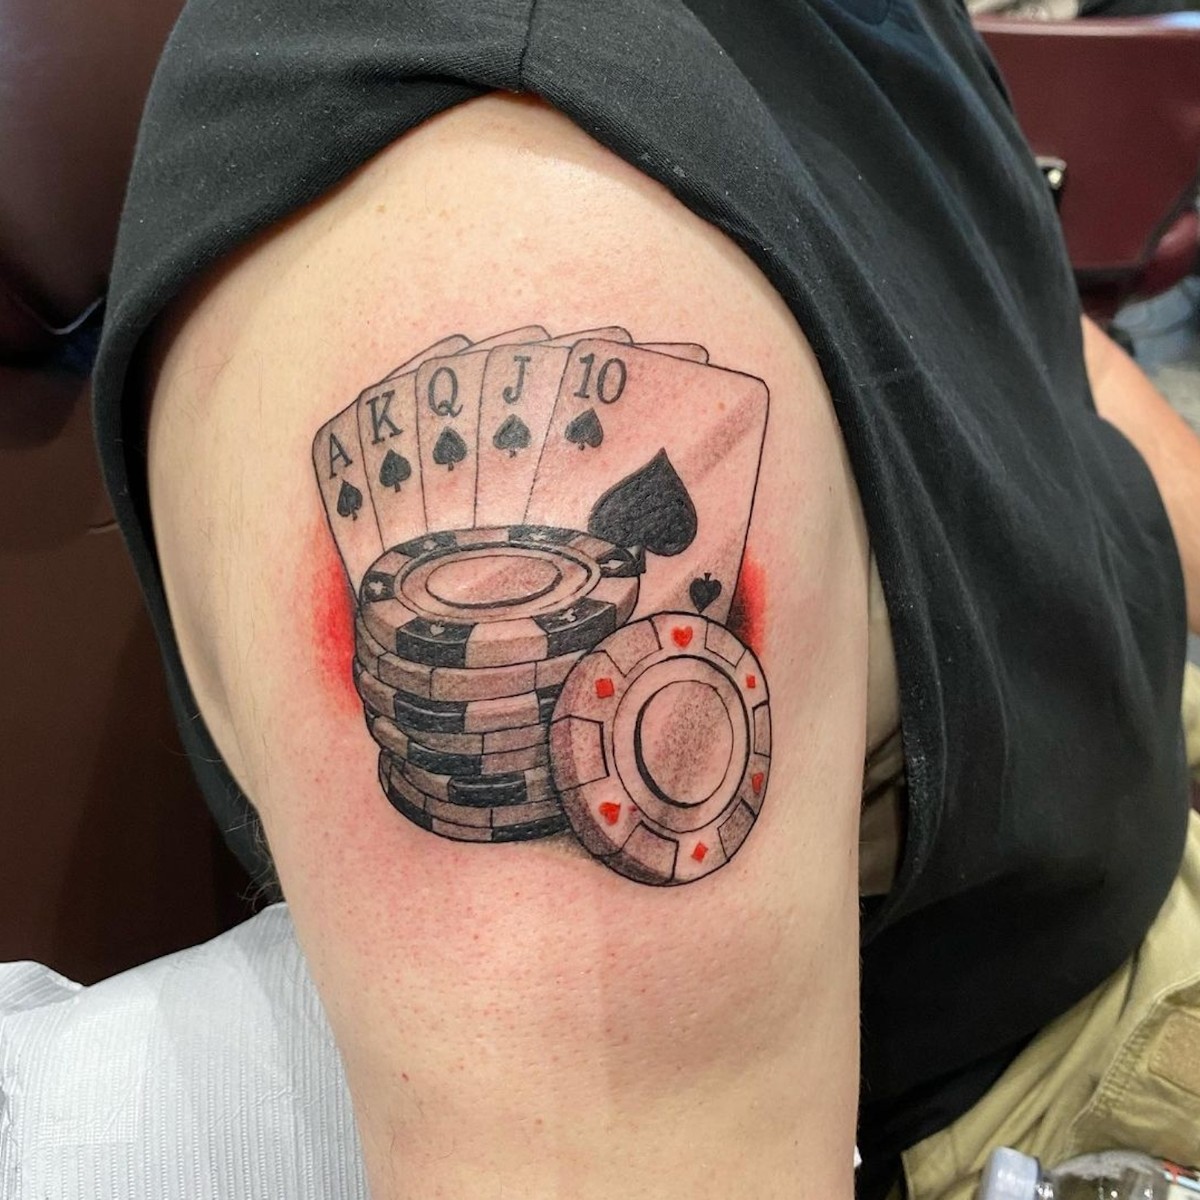 LV Tattoo  This customer made his own luck in 2020 tattooartist tattoos  lasvegas gamble poker chips lucky luck stack colorful 100 love   Facebook